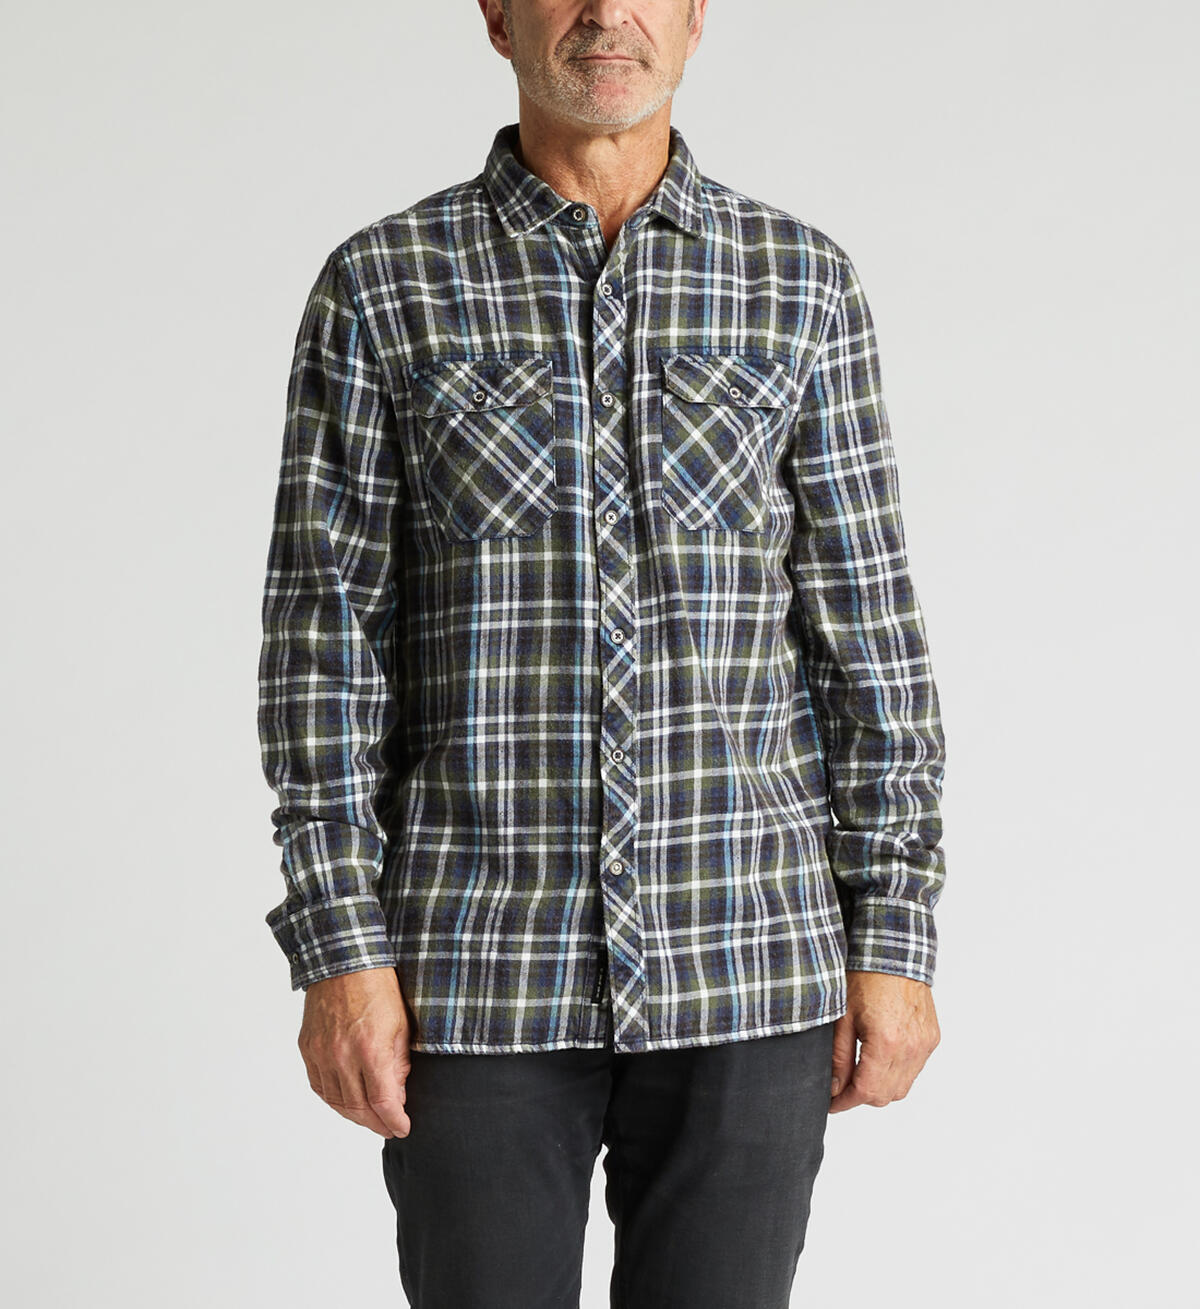 Cornell Long-Sleeve Plaid Shirt, Green, hi-res image number 0